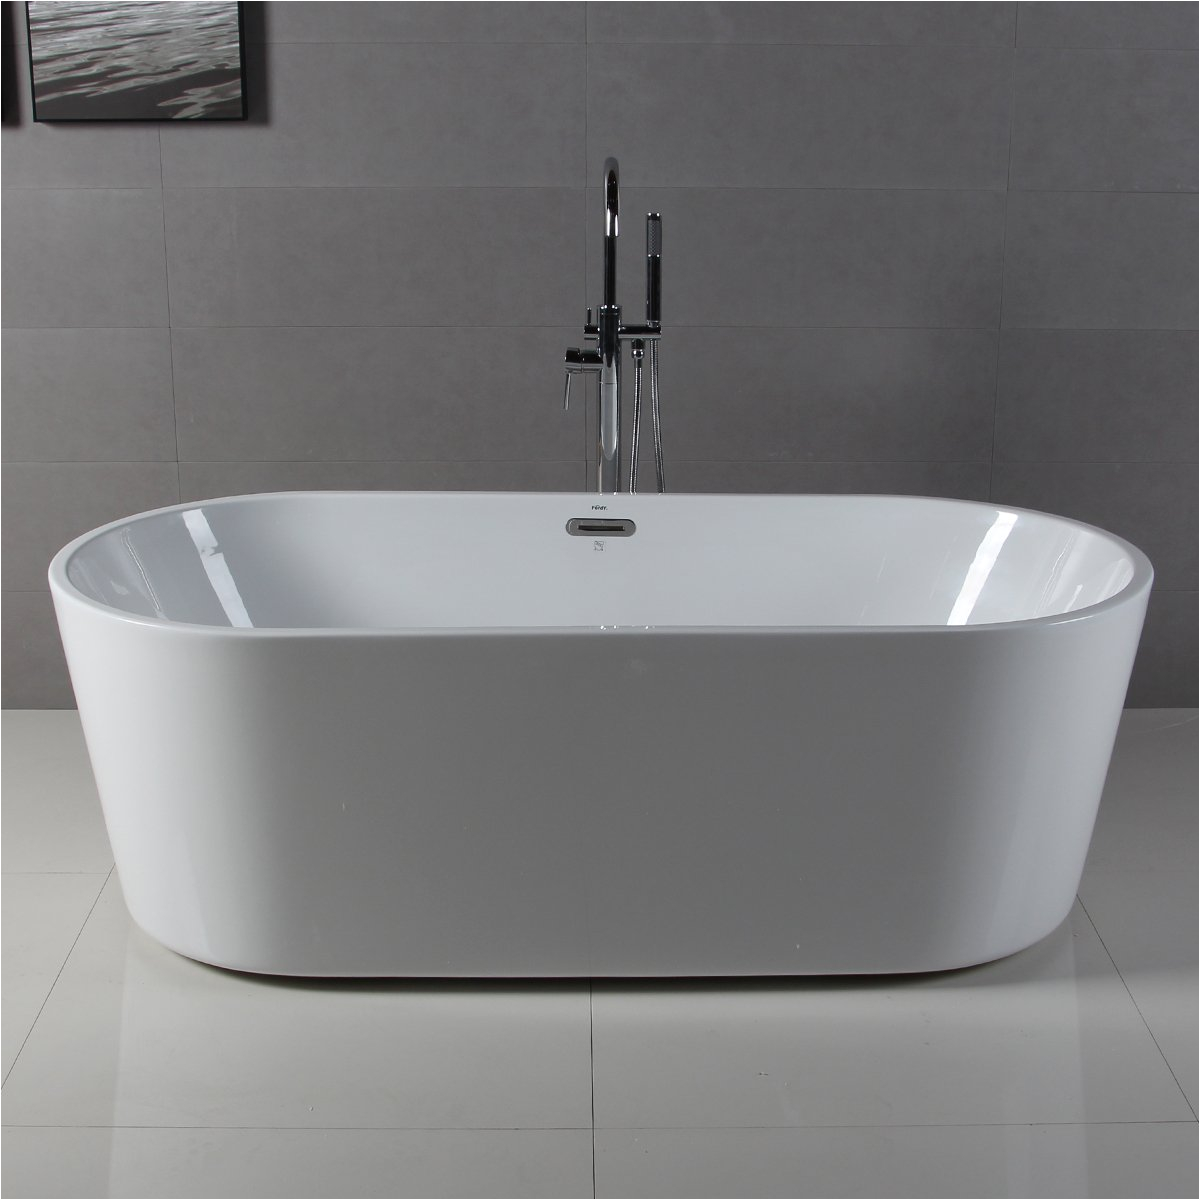 Best Acrylic Bathtubs 2019 Best Acrylic Bathtub 2019 Reviews and Buyer S Guide Home